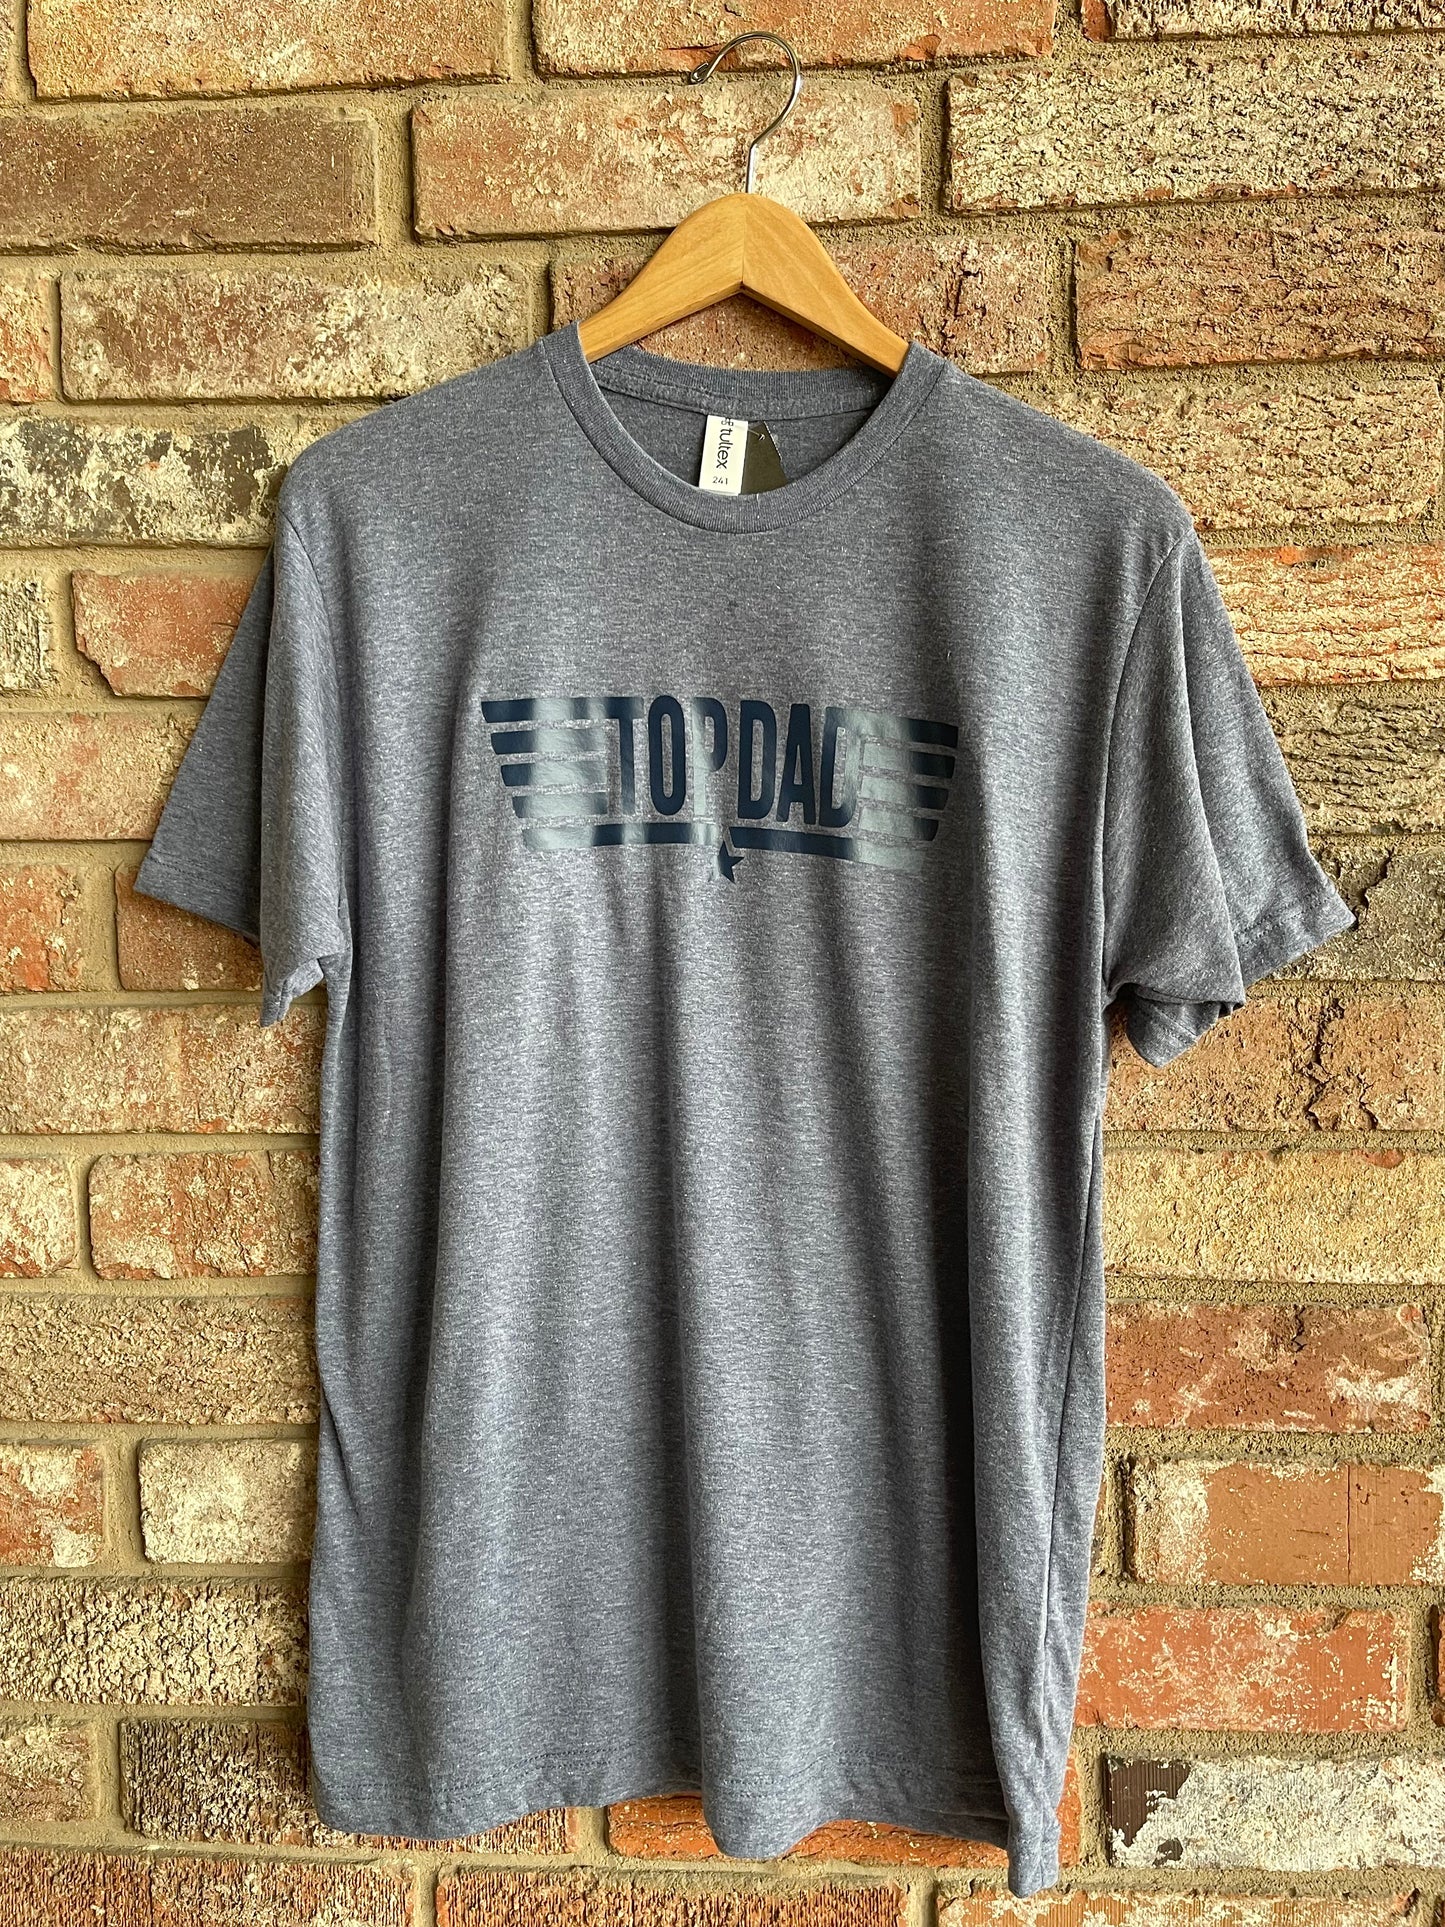 This is a heather blue unisex style tee with a crew neckline. It features a navy blue graphic and lettering, stating, "TOP DAD." It is a regular soft style fit.